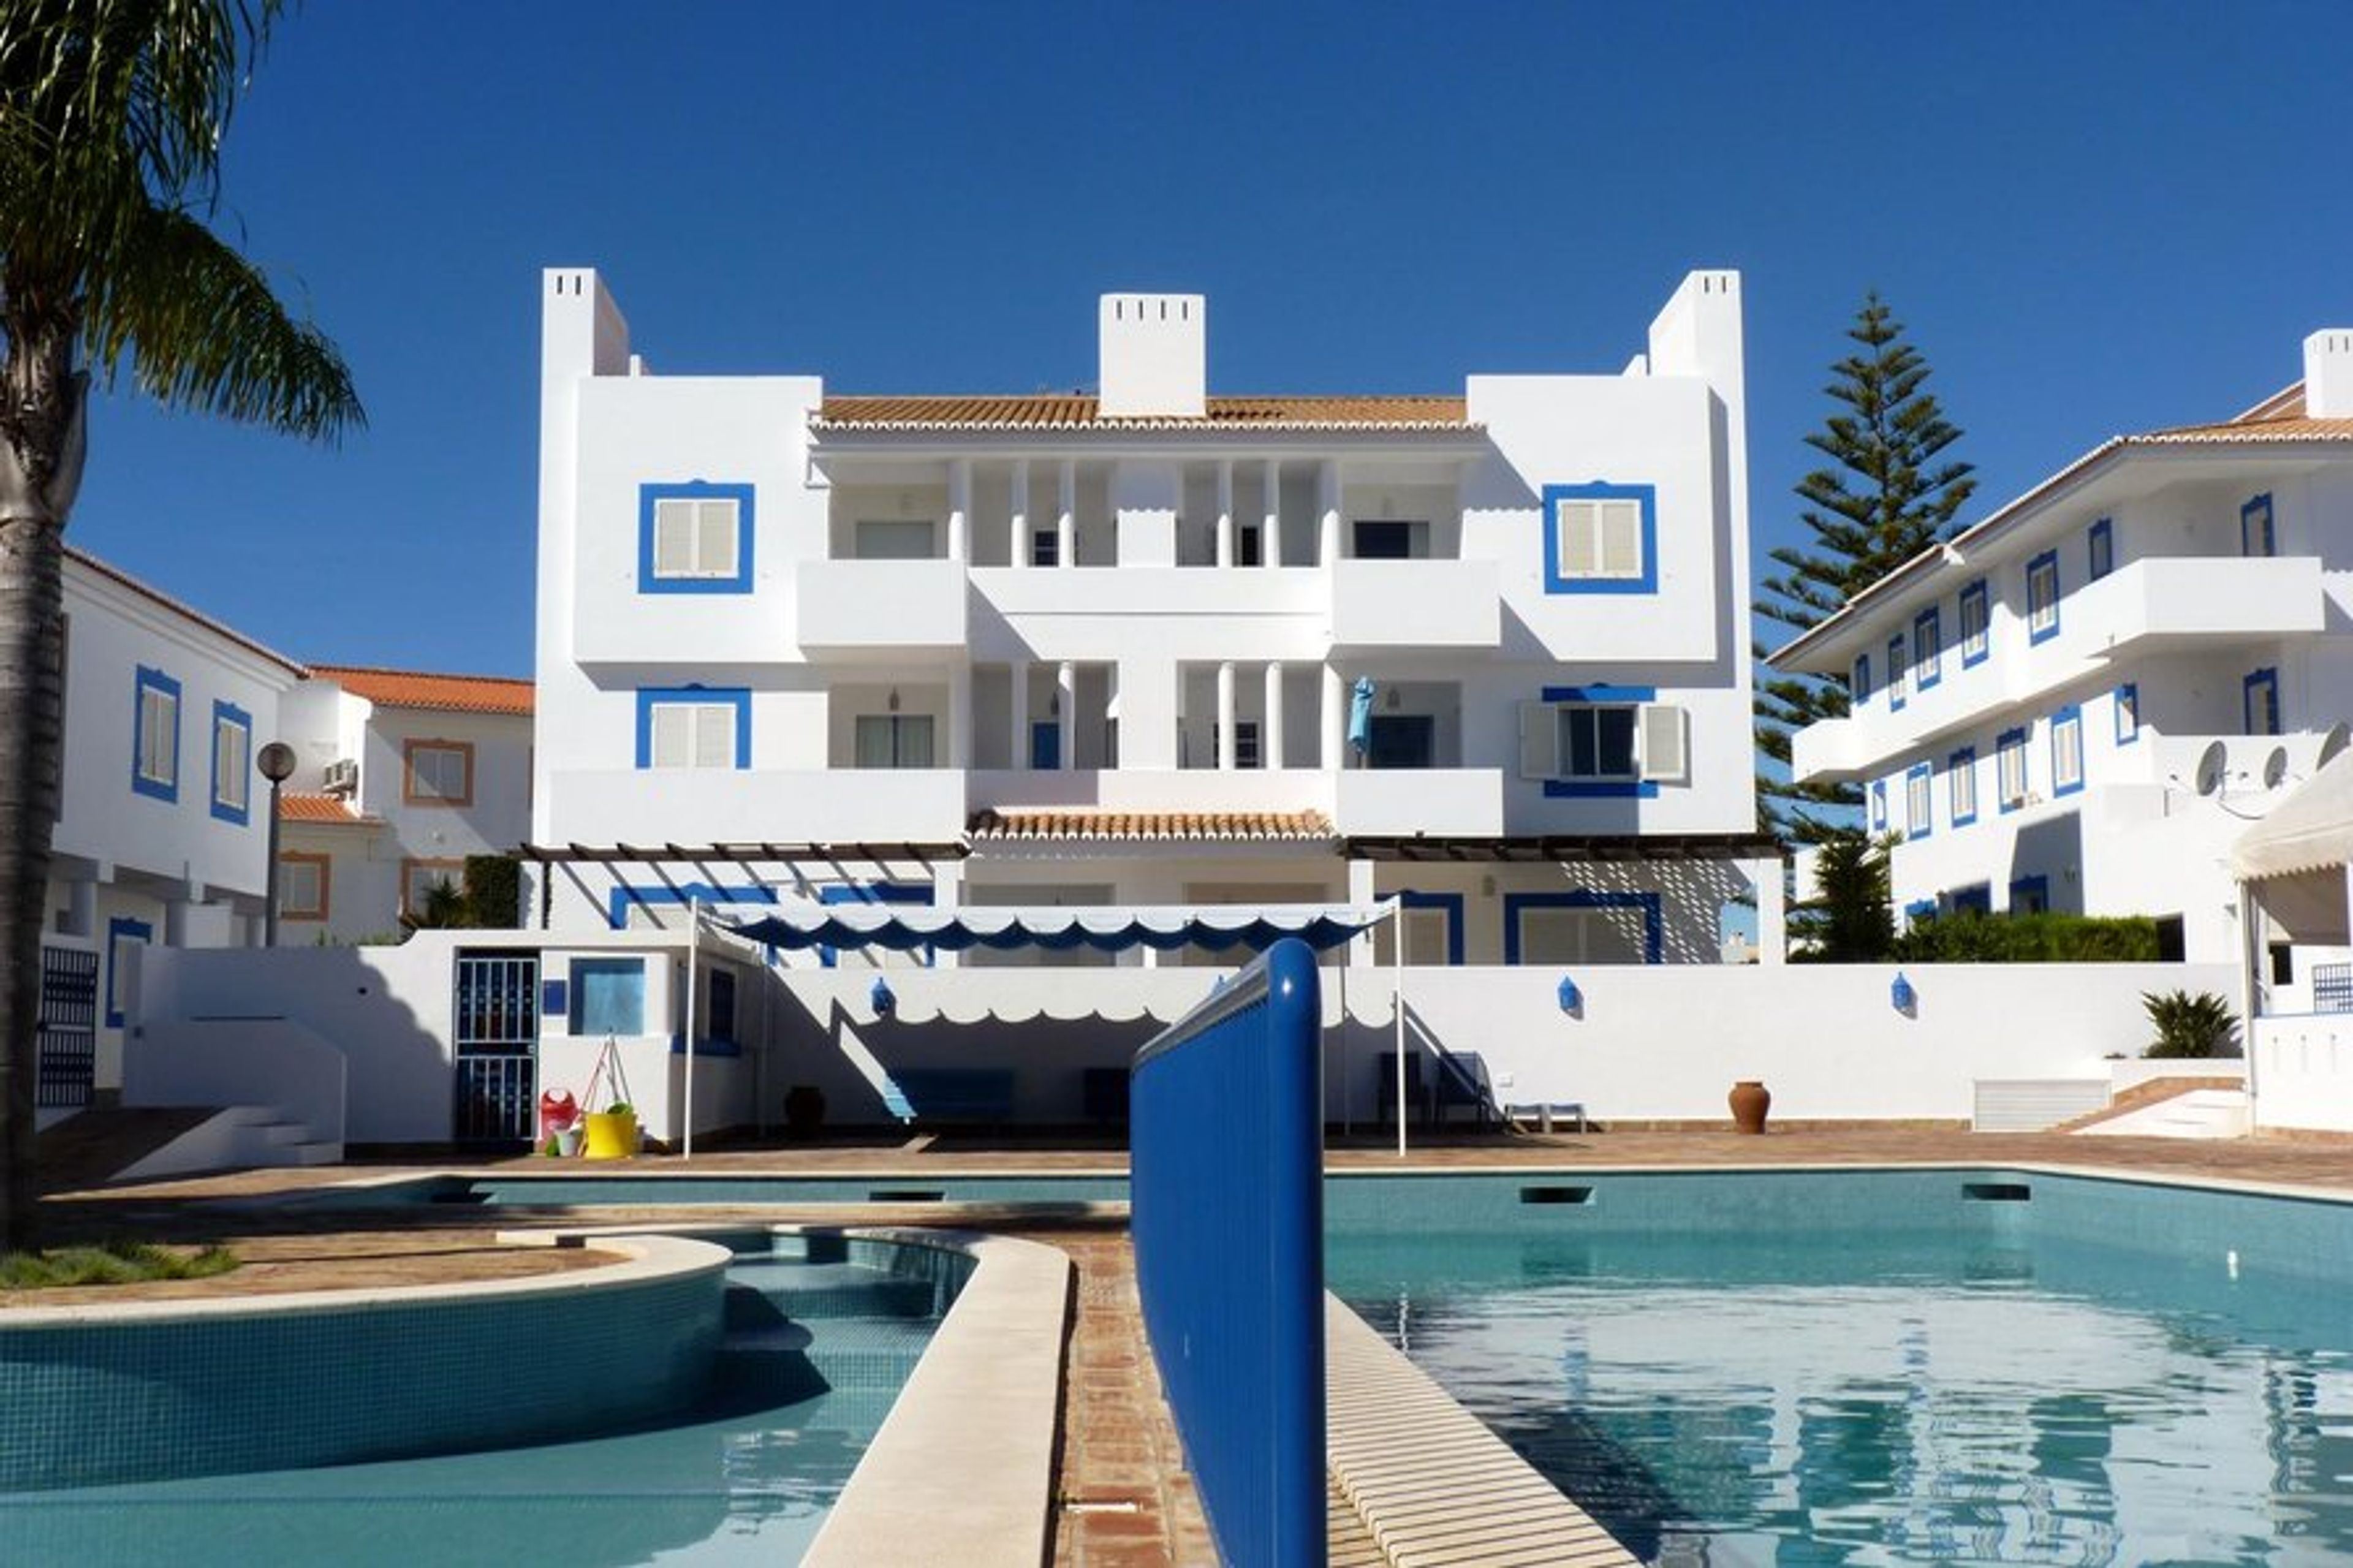 Apartment (top floor, right) overlooks adults' and children's pools